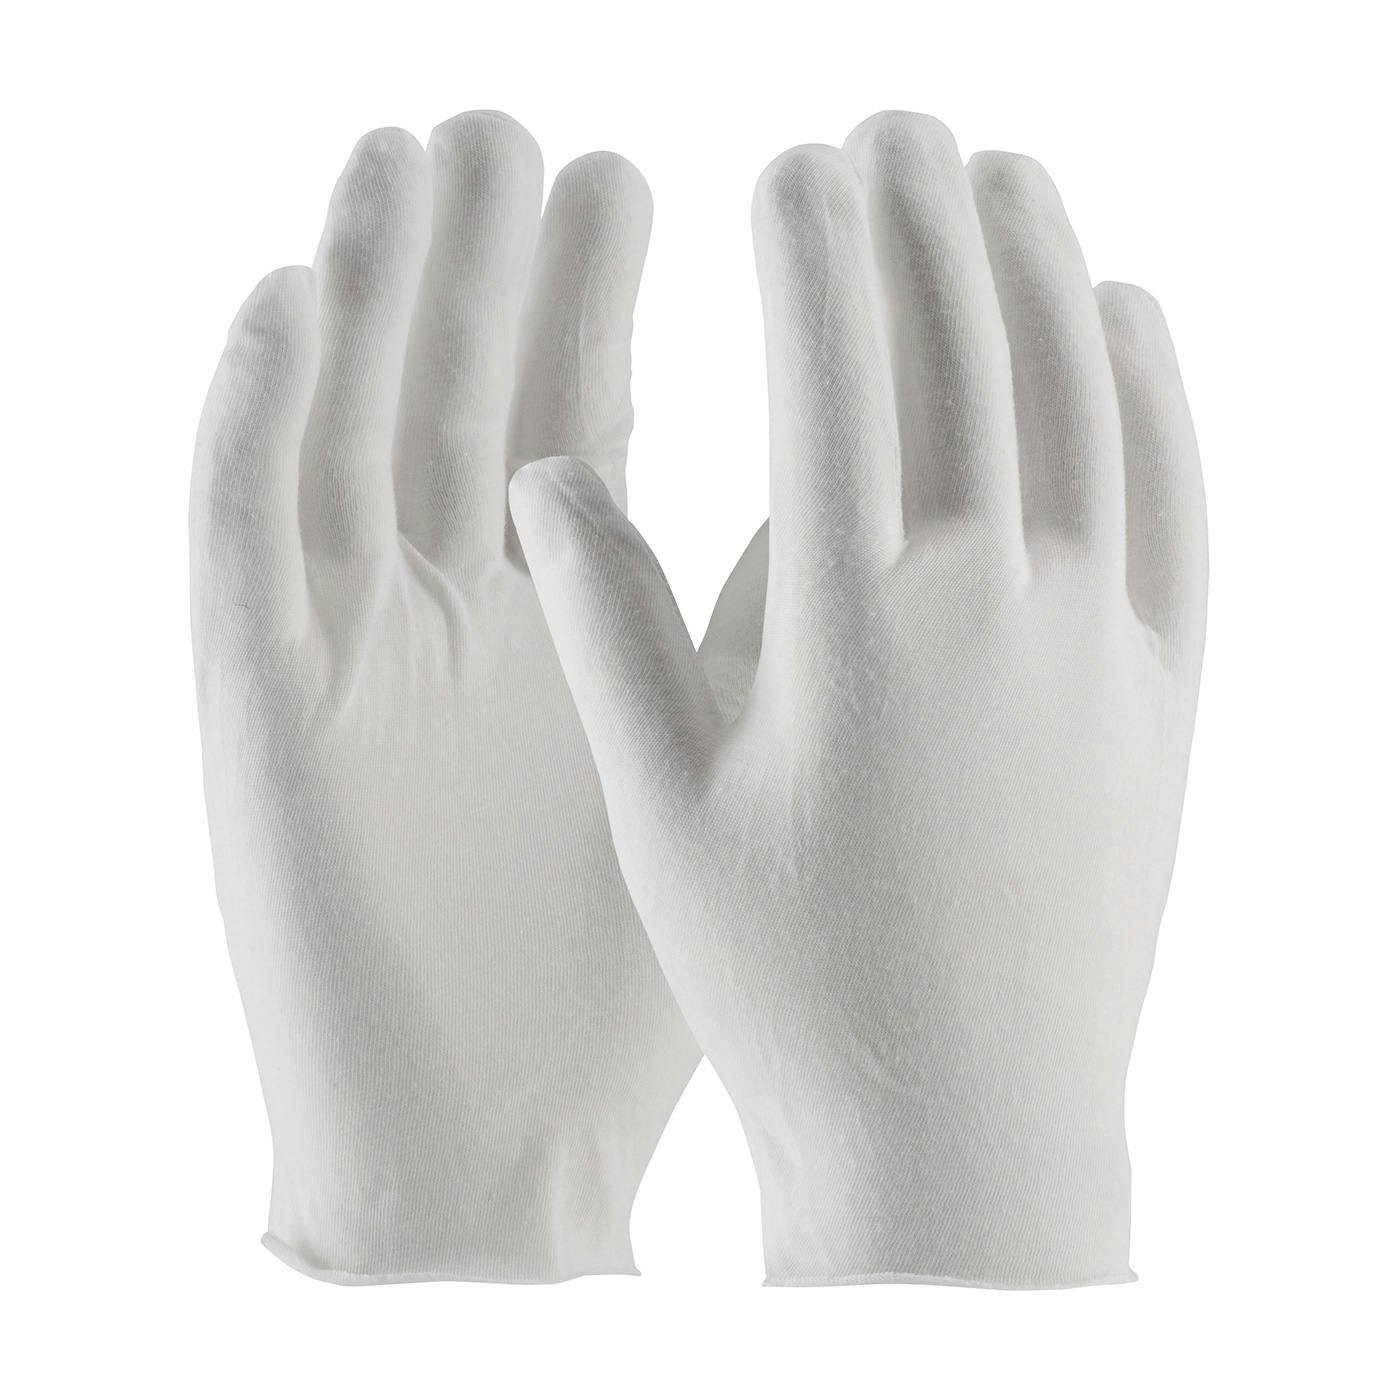 Economy, Light Weight Cotton Lisle / Polyester Inspection Glove with Unhemmed Cuff - Ladies', White (97-511) - LADIES